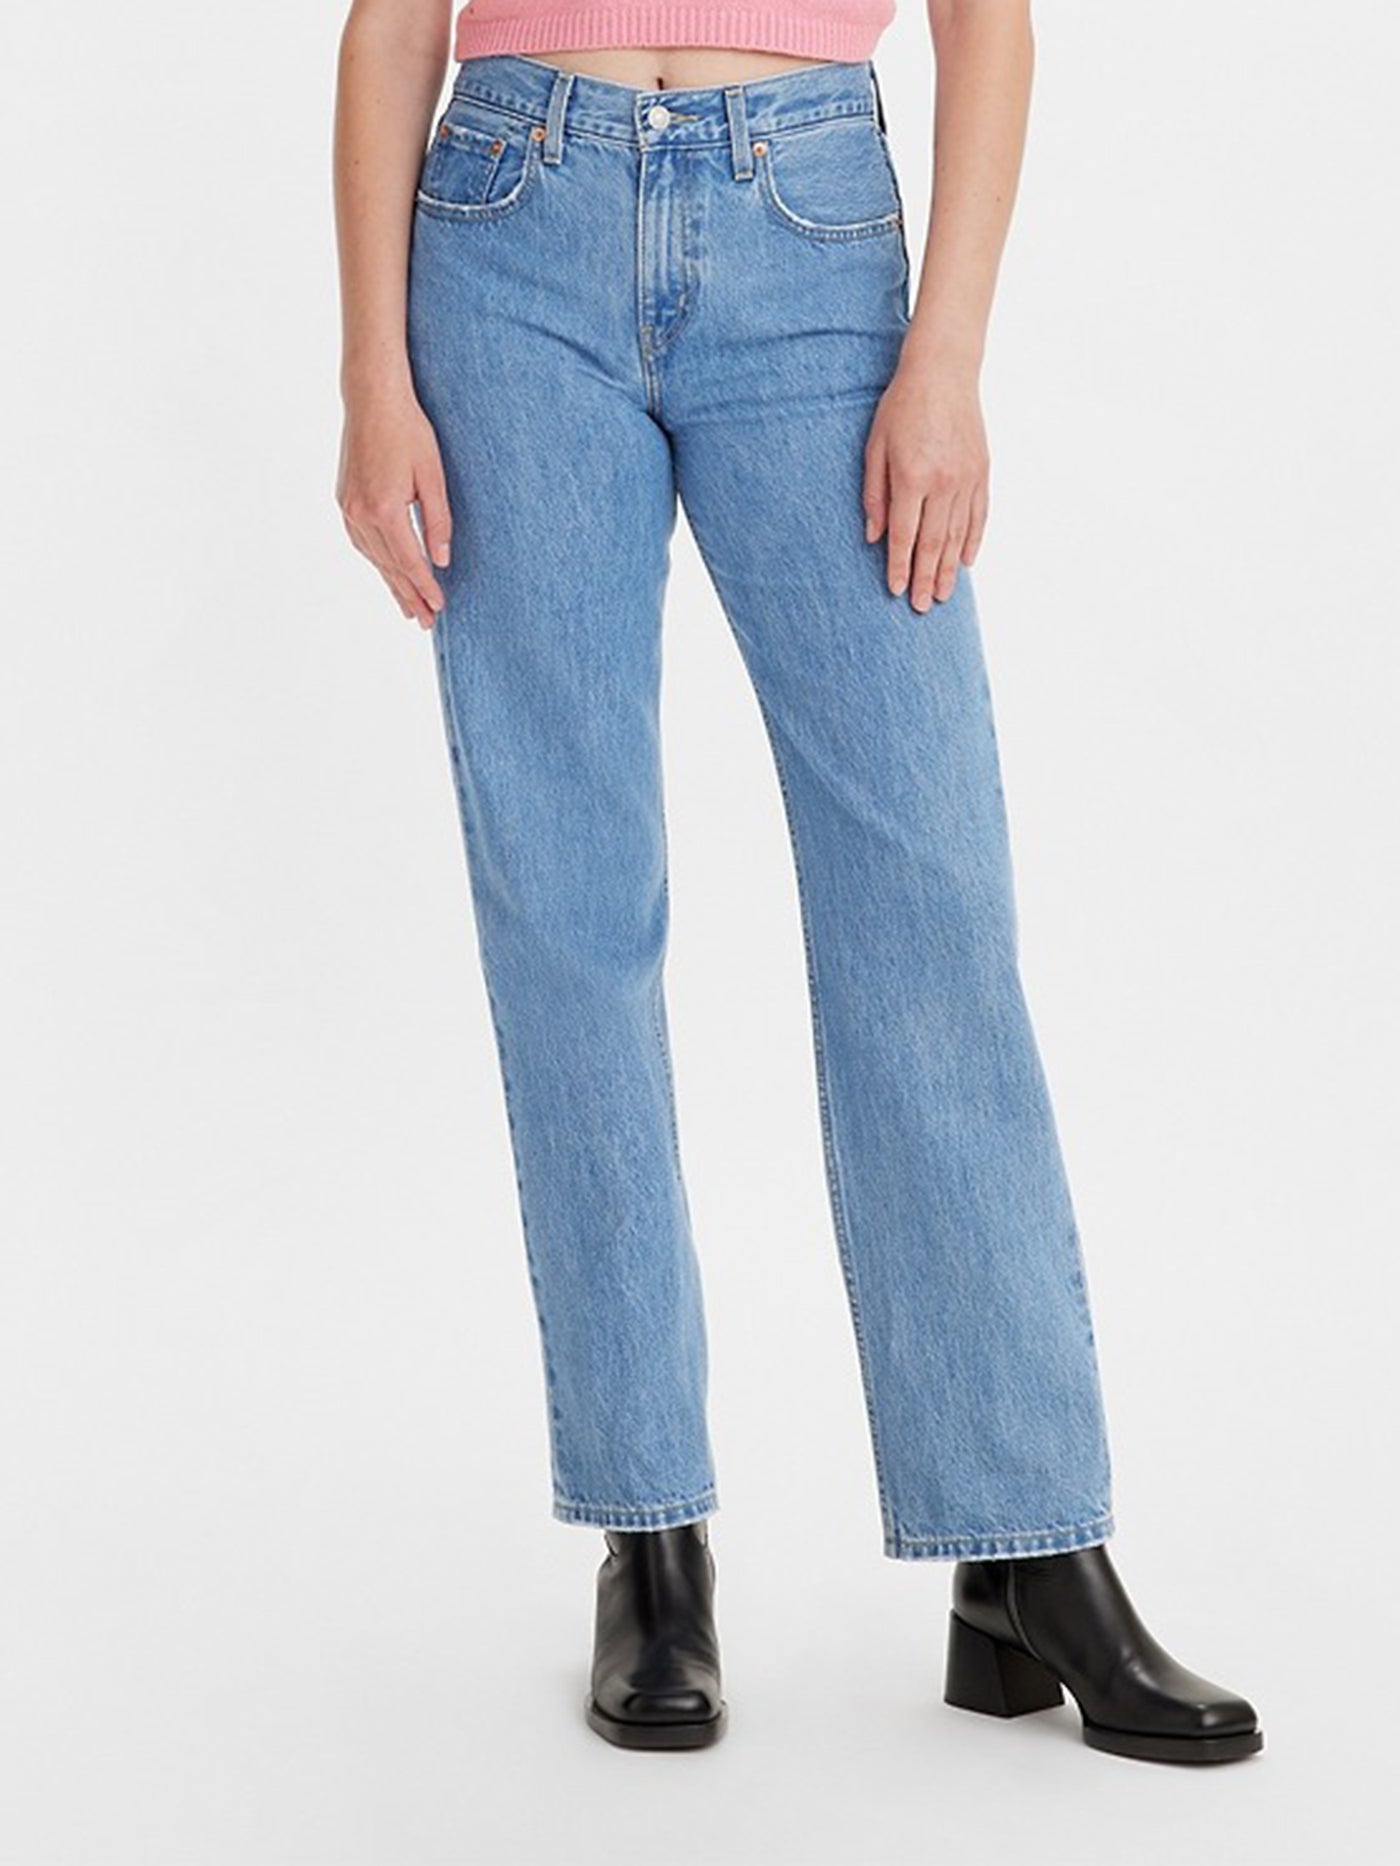 Levi's Low Pro Charlie Try Jeans